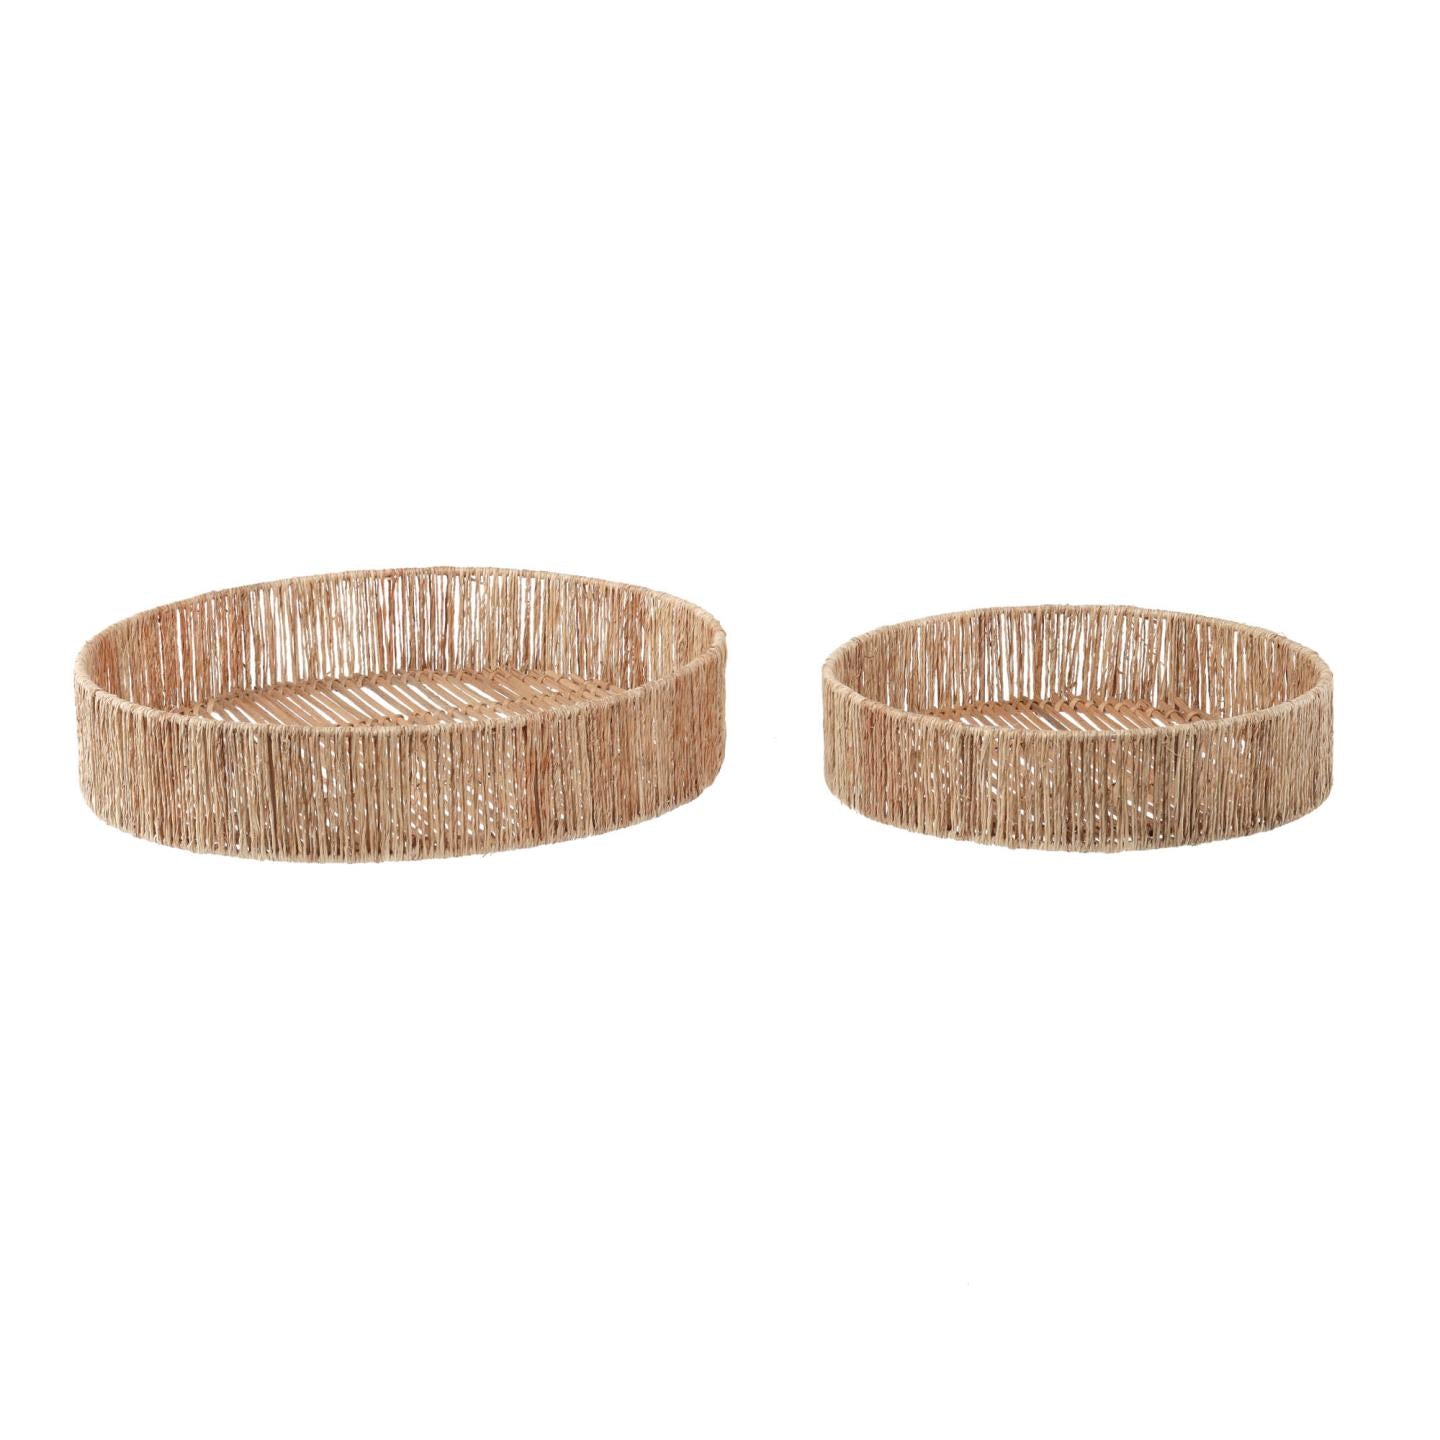 Estibalis set of 2 round jute and rattan trays with natural finish